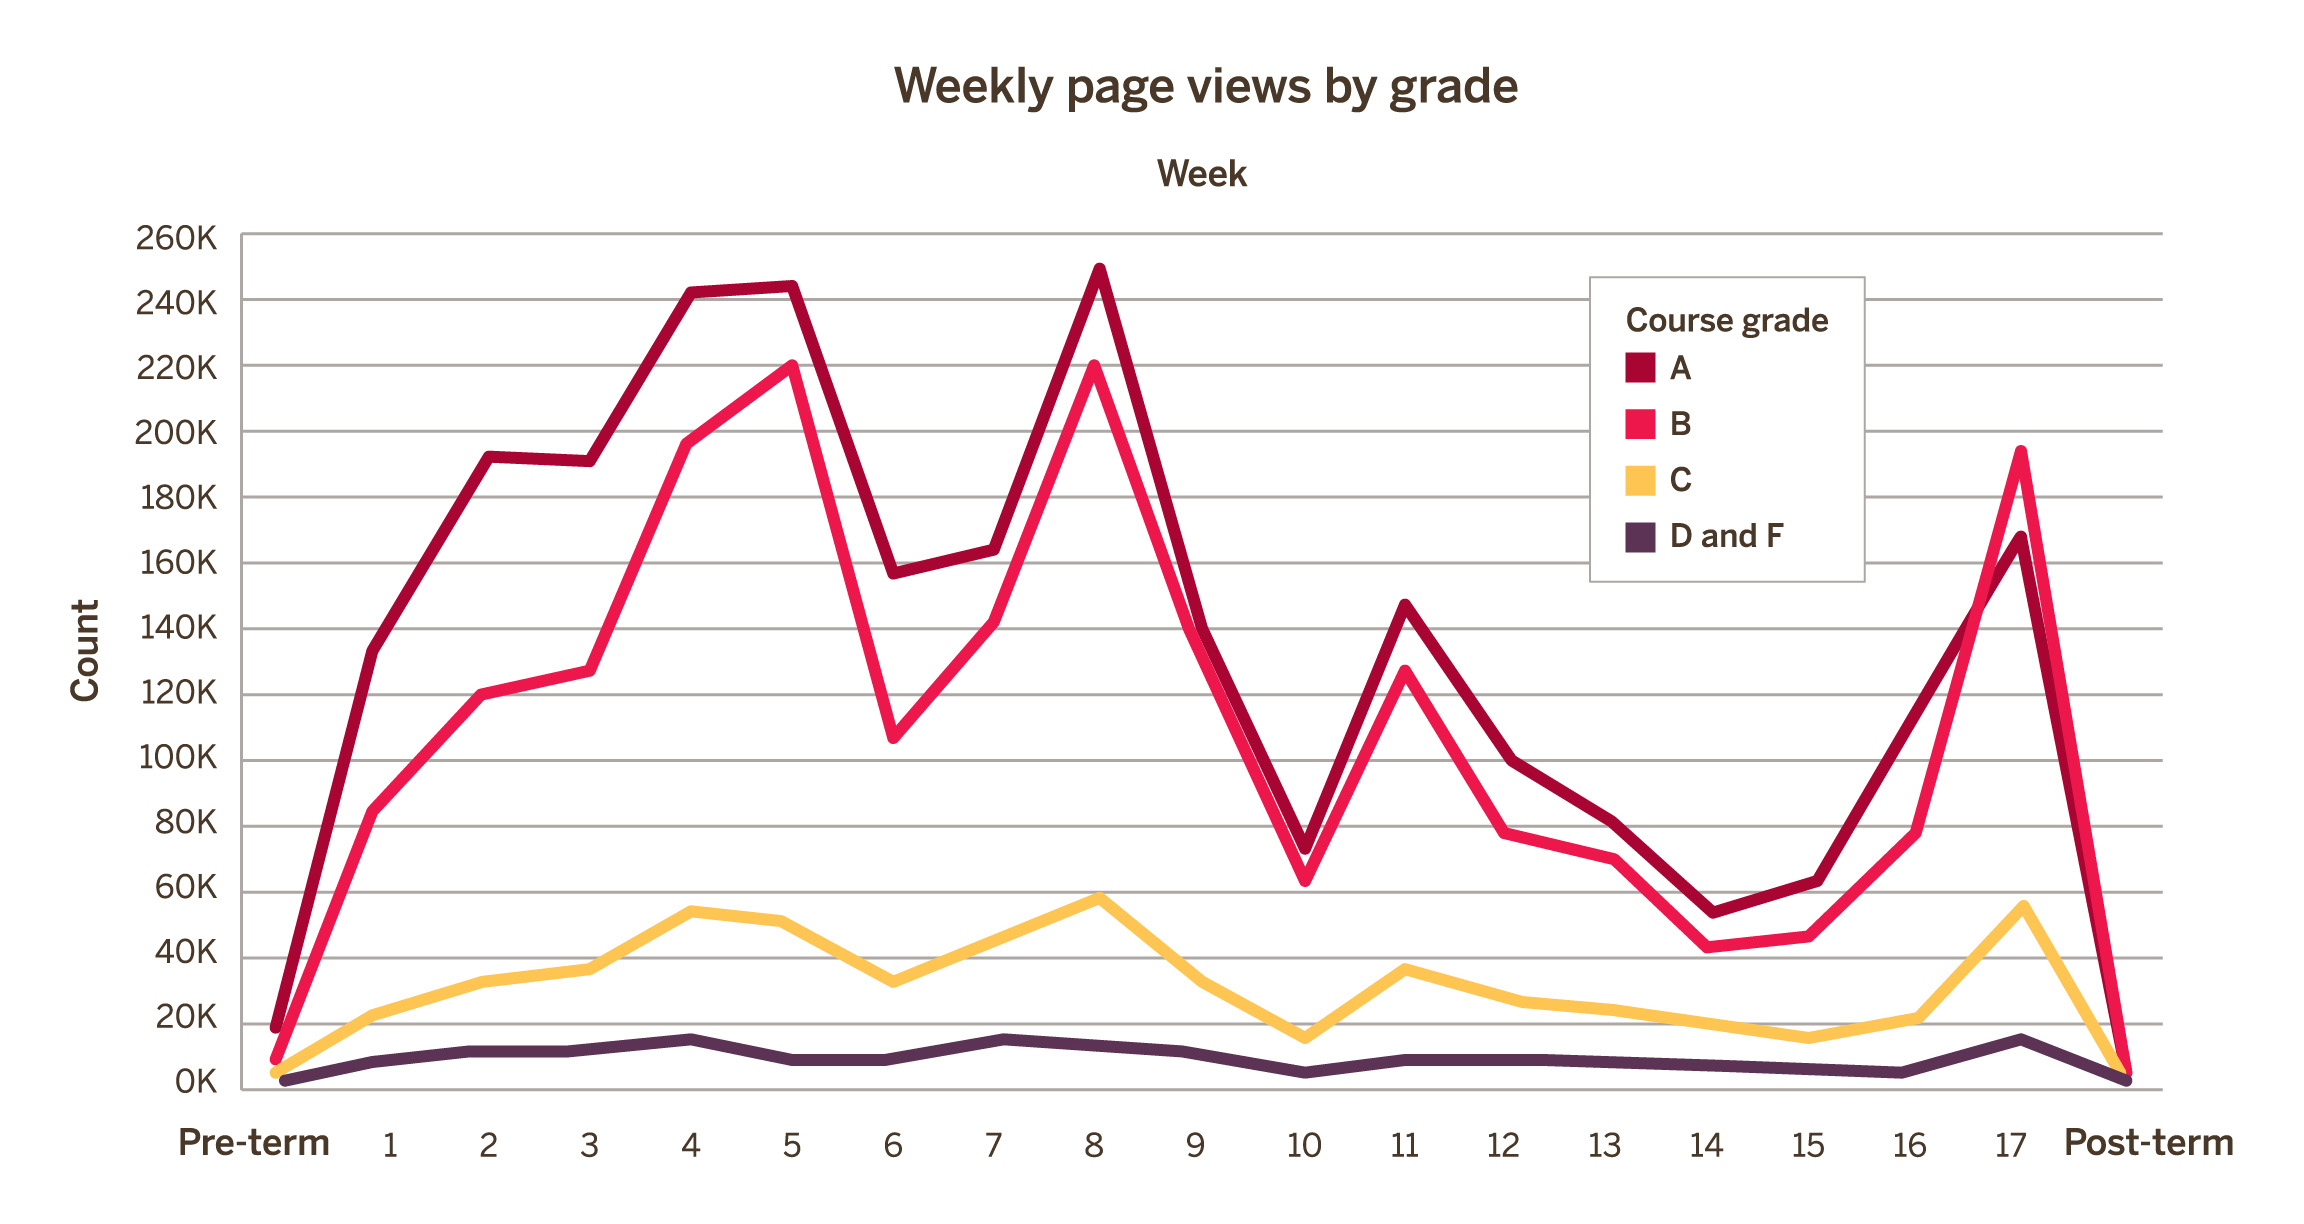 Weekly page views by grade